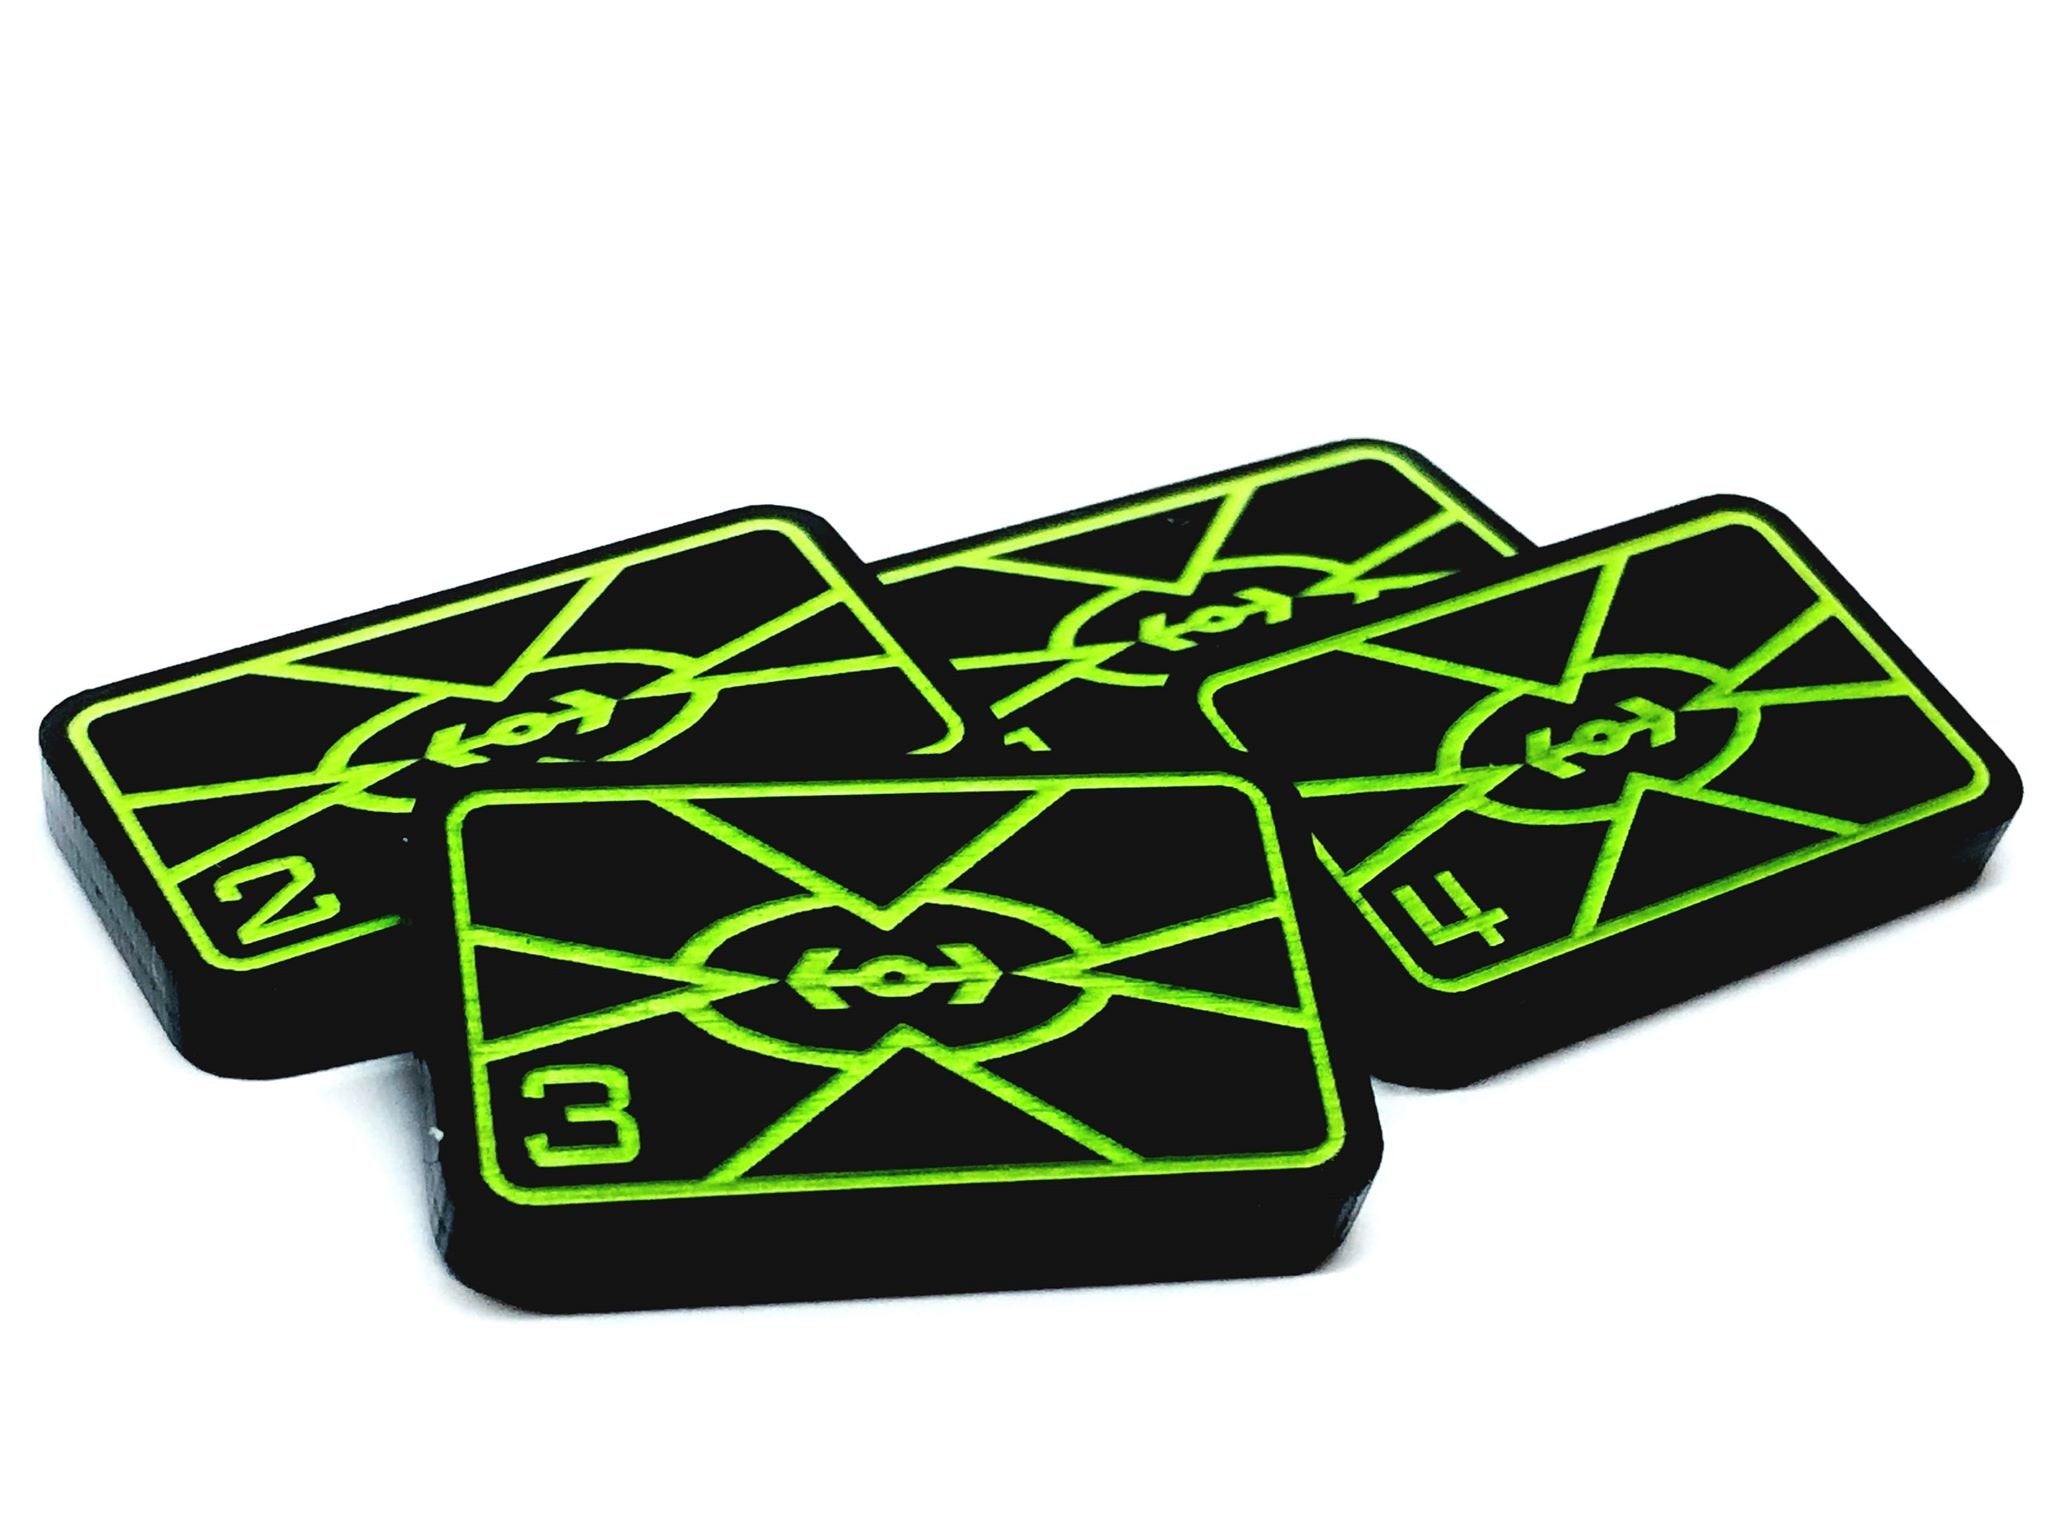 4 x Rebel Target Lock Themed Tokens (Double Sided Aurebesh & Numbers)